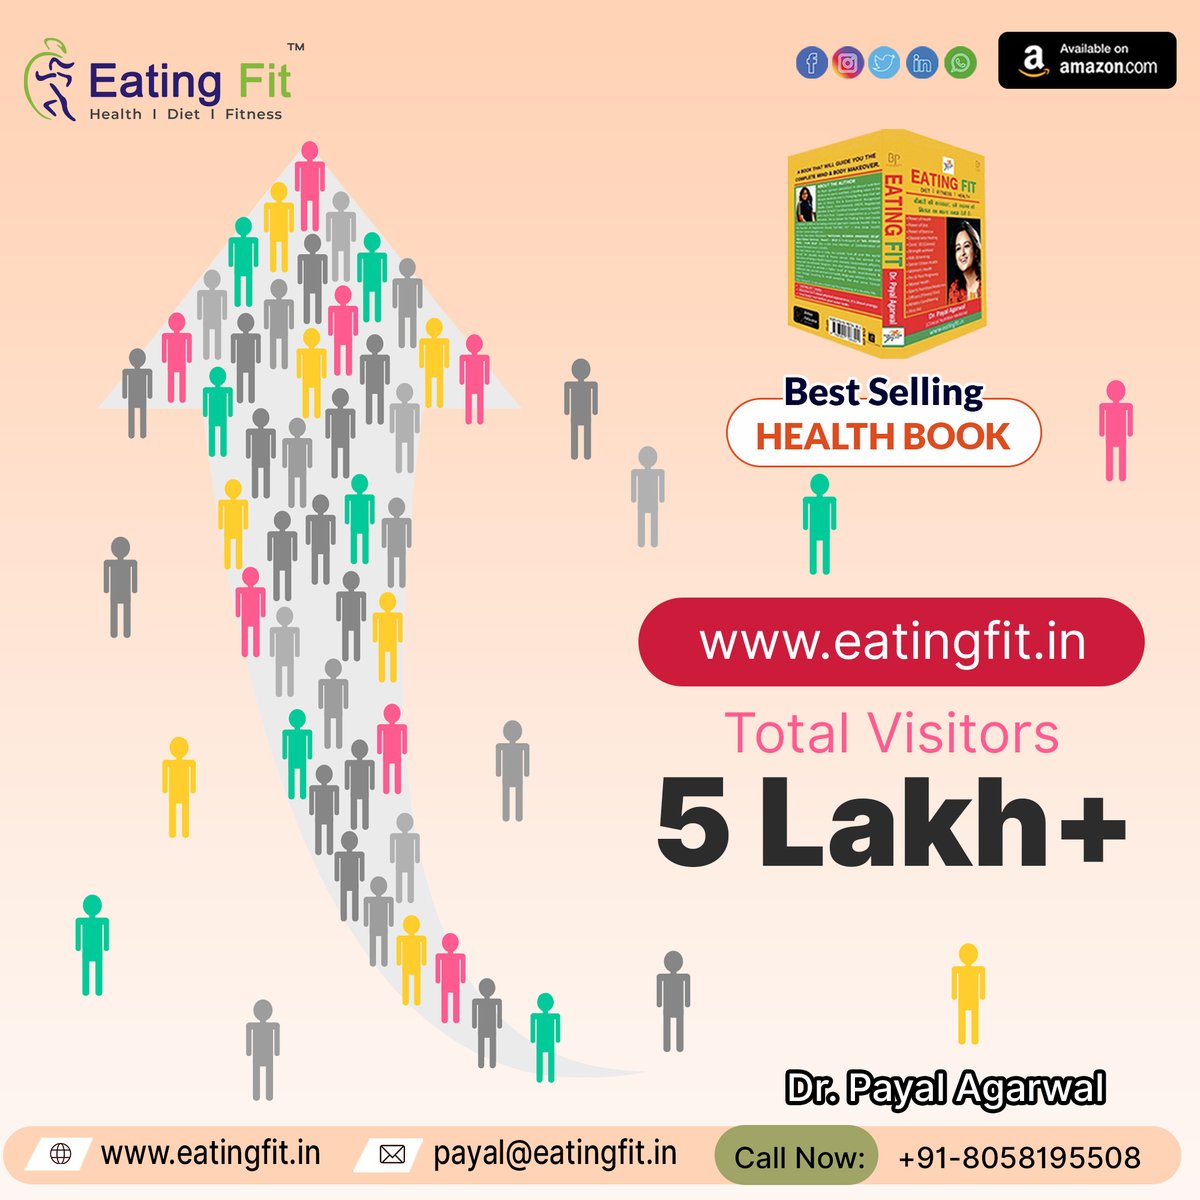 Total Visitors
5 Lakh+

eatingfit.in

#healthbook #totalvisitors #motivation #fitnessmotivation #exercise #weightloss #bodybuilding #healthyfood #healthyliving  #mentalhealth #healthcare #eatclean #healthyeating #dietplan #healthylife #healthynutrition #eatingfit